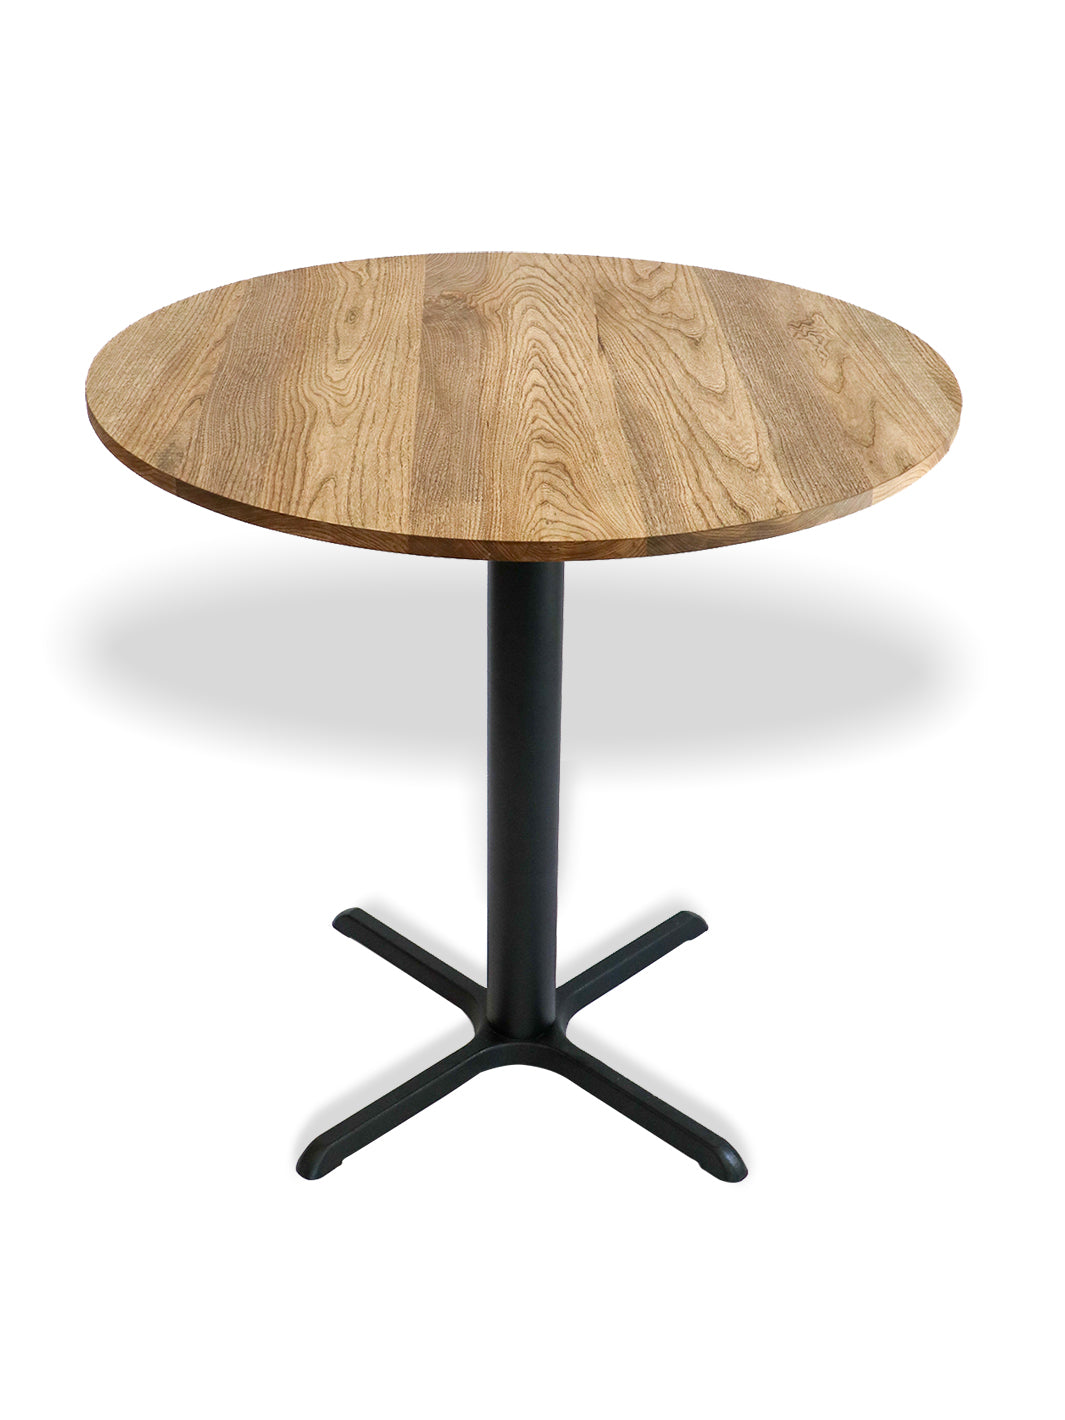 Modern Round Hackberry Pub Table with Black Steel Legs | Bar or Standard Height Earthly Comfort dining table 1529